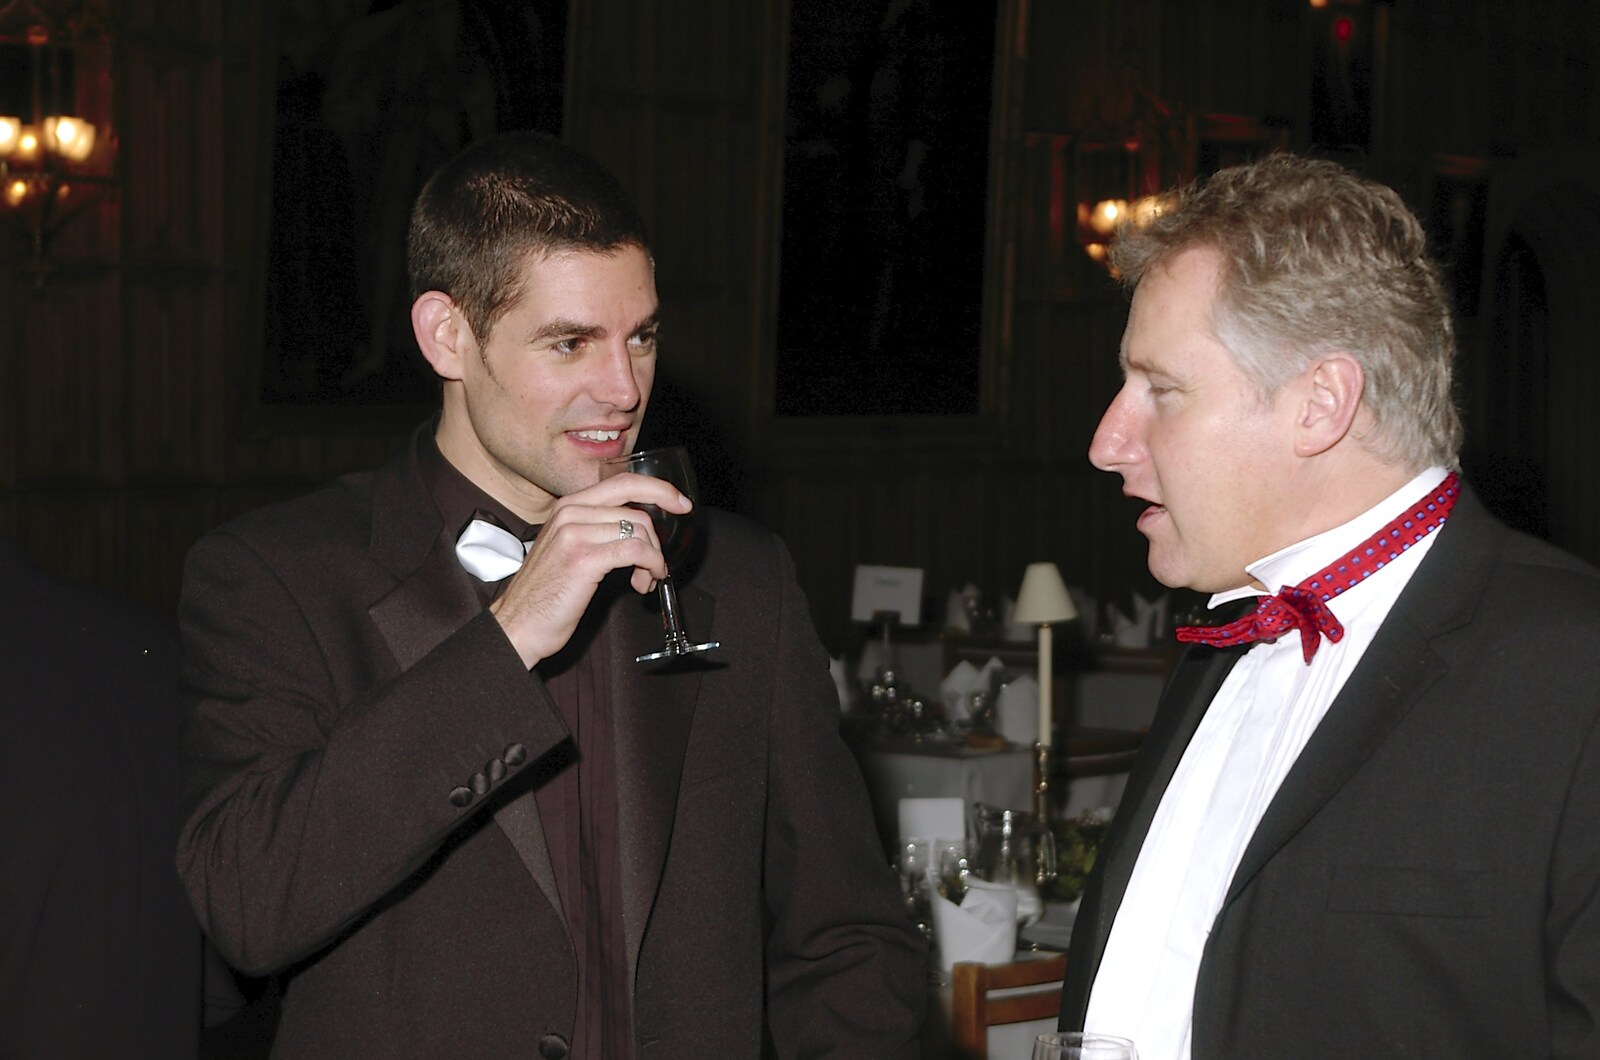 Rob Hamblen chats to someone from Qualcomm Cambridge's Christmas Do, King's College, Cambridge - 22nd December 2004